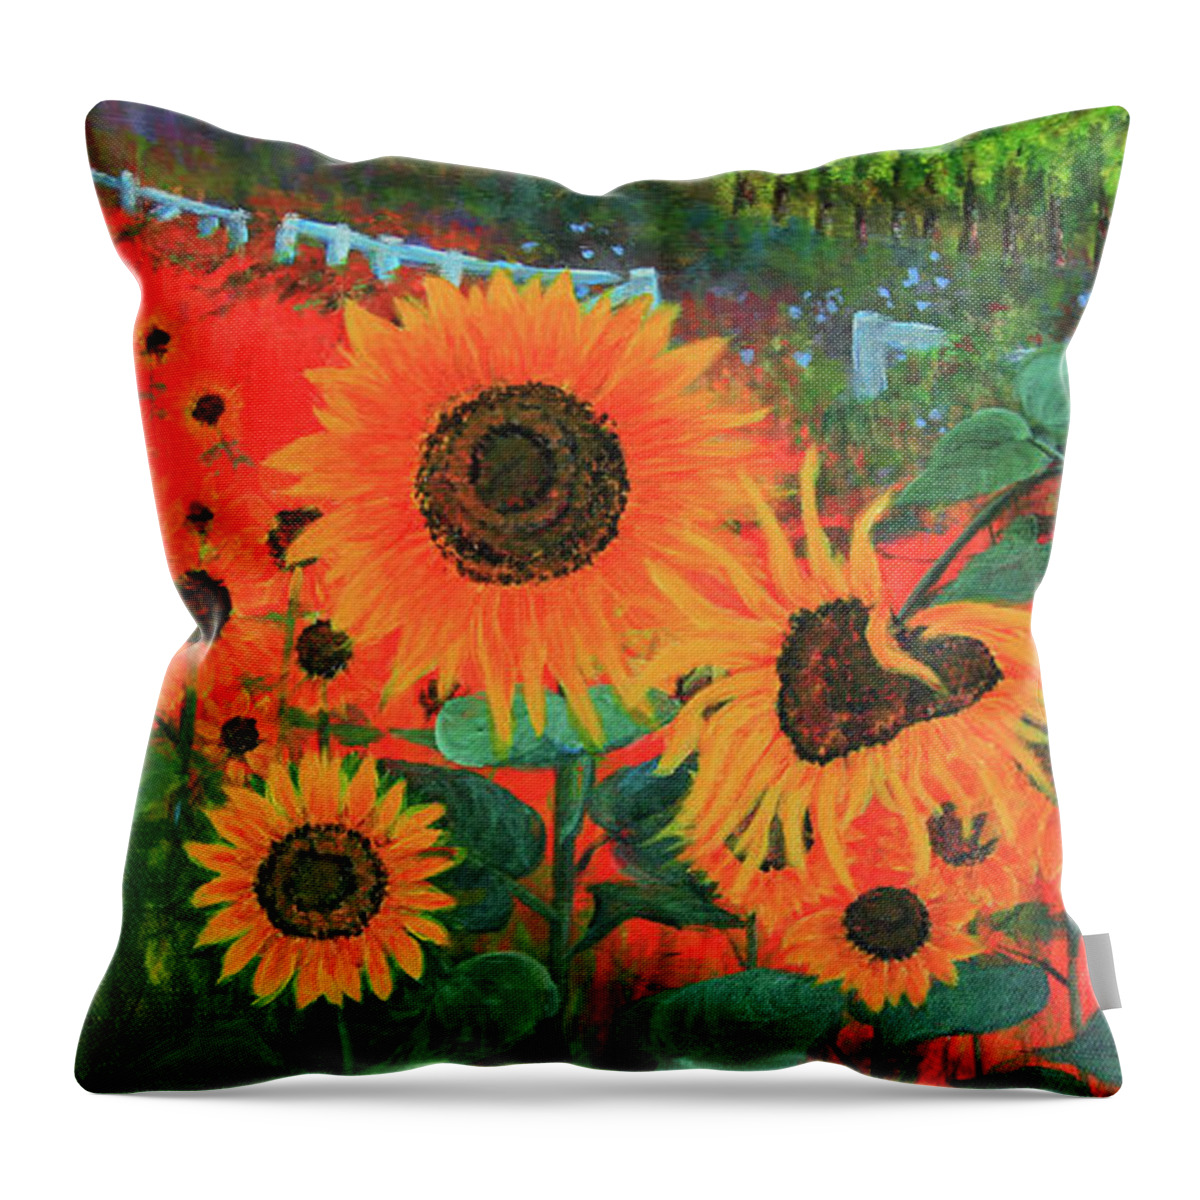 Sunflower Throw Pillow featuring the painting Sunflower Life by Jeanette French